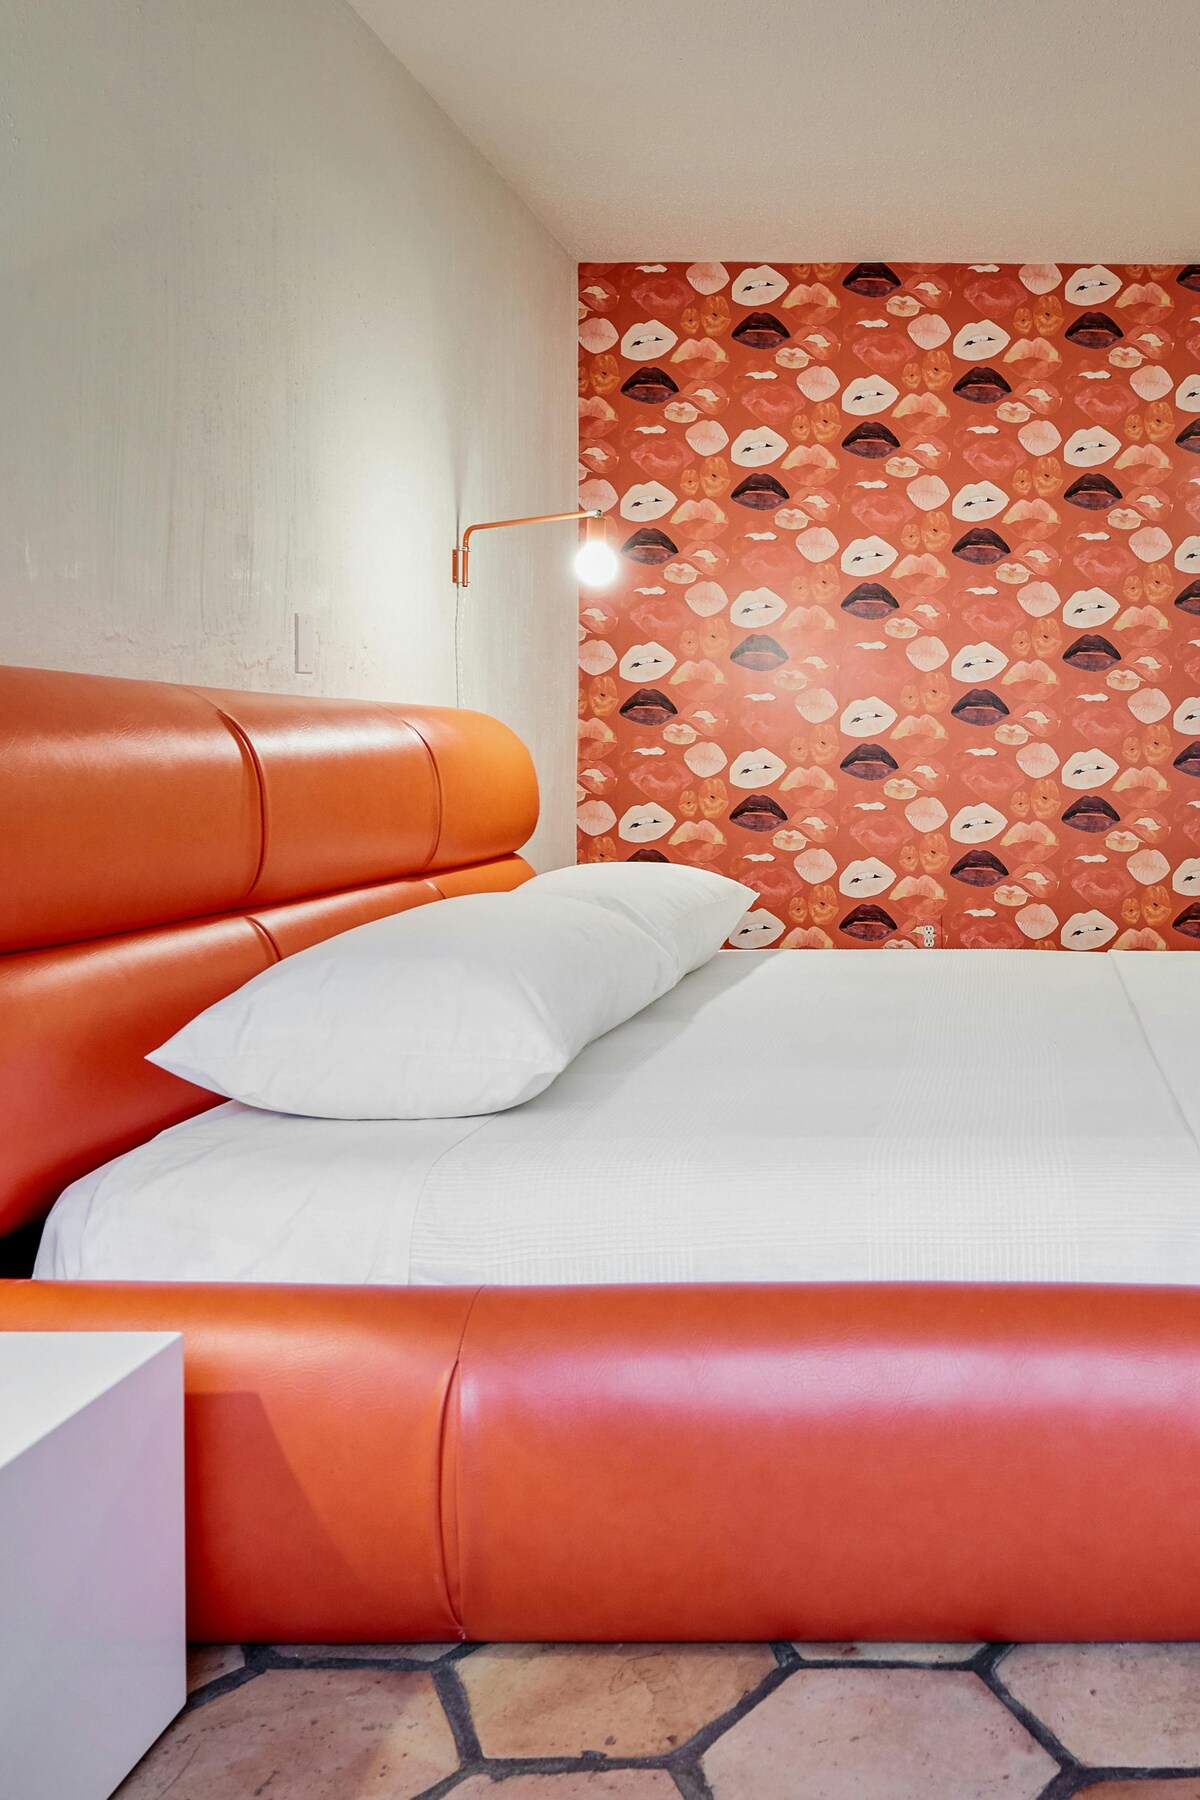 Cheeky throwback design in restyled classic motel